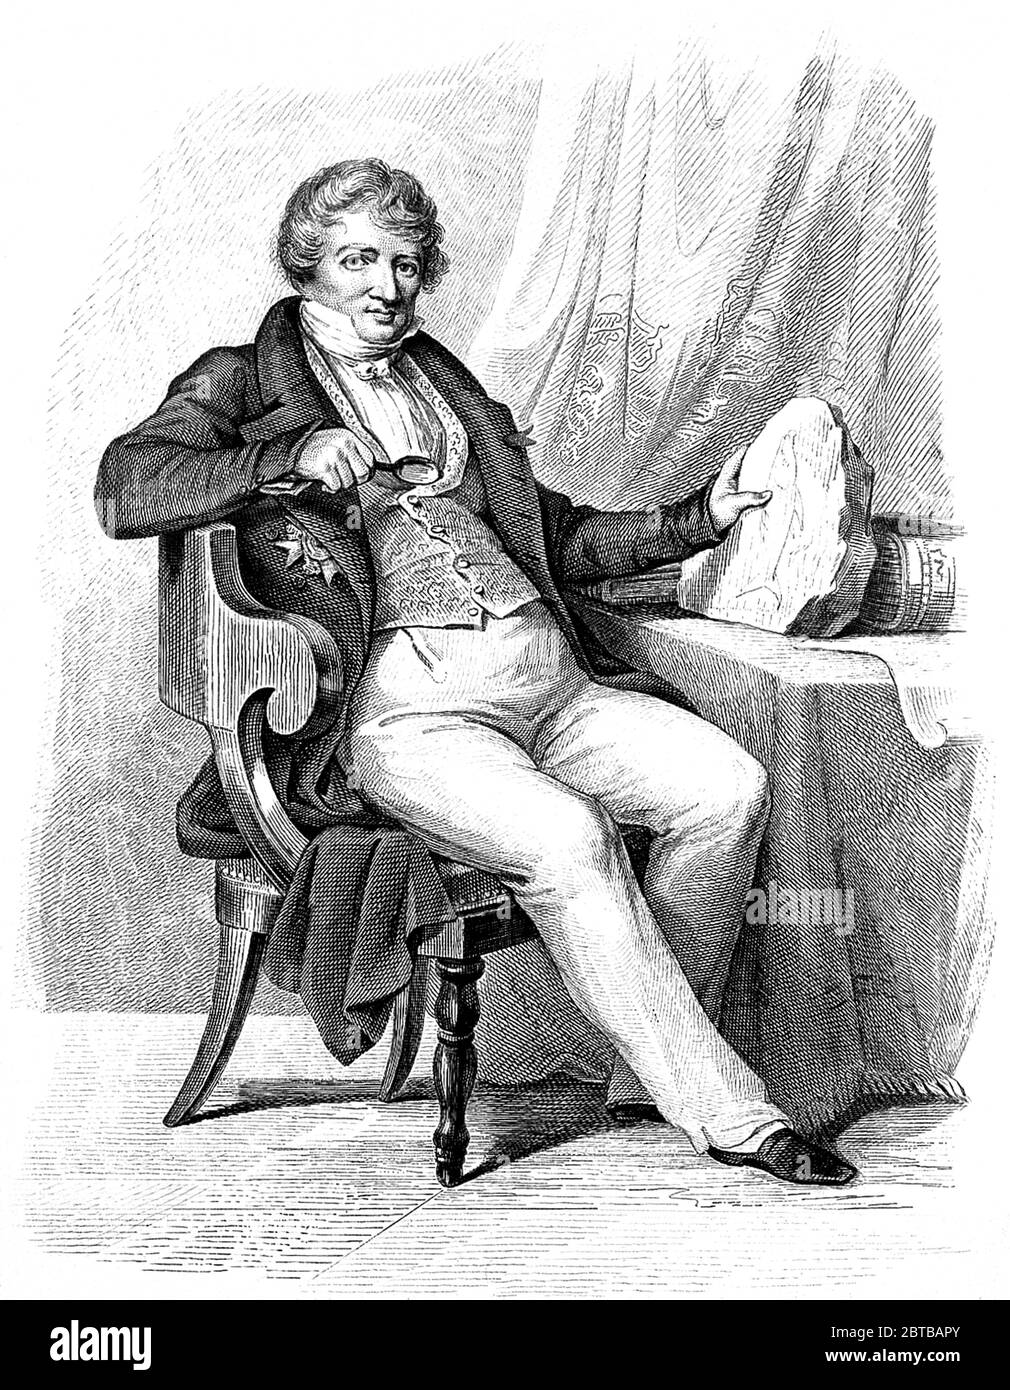 1830 c, FRANCE : The french anatomist and paleontologist  Baron GEORGES CUVIER ( 1769 - 1832 ), holding a fish fossil . Portrait engraved by Giraud , 1845 ca. - ZOOLOGIST - ZOOLOGO - ZOOLOGIA - FOSSILE - FOSSIOLI - ZOOLOGY - BIOLOGIA - BIOLOGY - BIOLOGO - BIOLOGIST - PALEONTOLOGO - PALEONTOLOGIA - ANATOMIA - ANATHOMY - ANATOMIST - ANATOMISTA - HISTORY - foto storica storiche - scientist - portrait - ritratto - - DOTTORE - MEDICO - MEDICINA - medicine - SCIENZA - SCIENCE -  DOTTORE - MEDICIAN - illustrazione - illustration - engraving - incisione - collar --- Archivio GBB Stock Photo